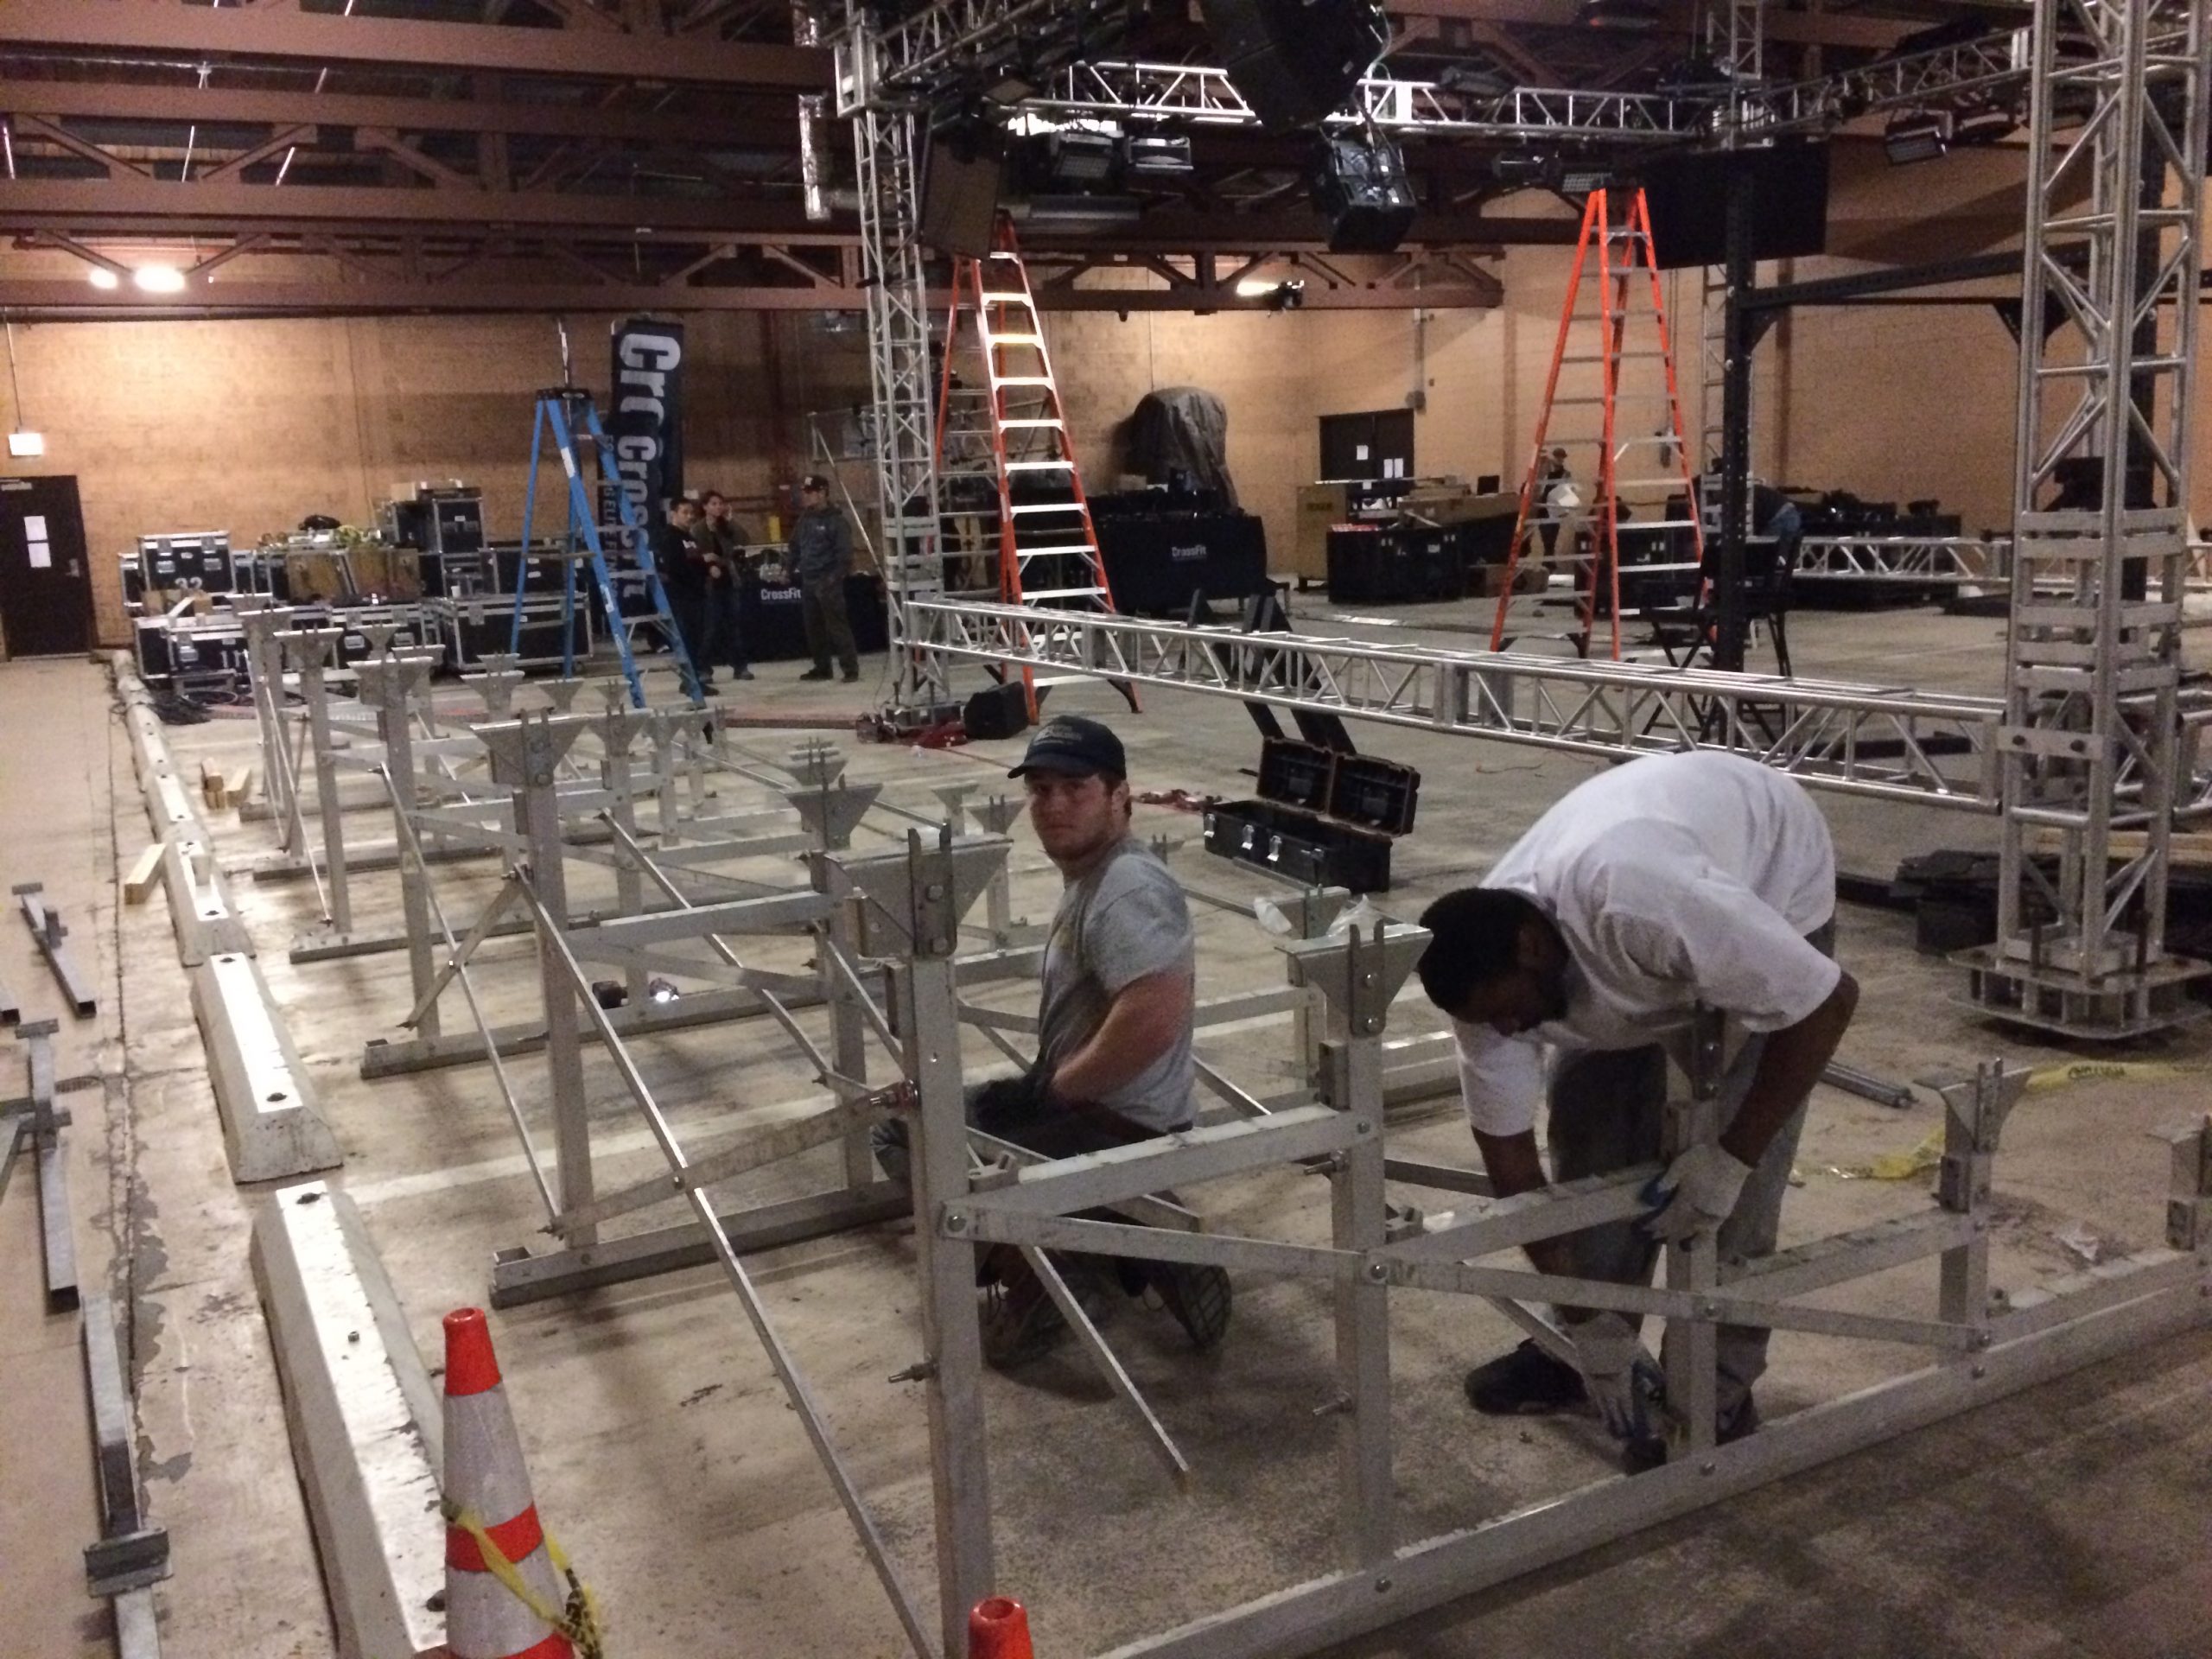 Assembling 5 Row bleachers with railing that seats 50 people